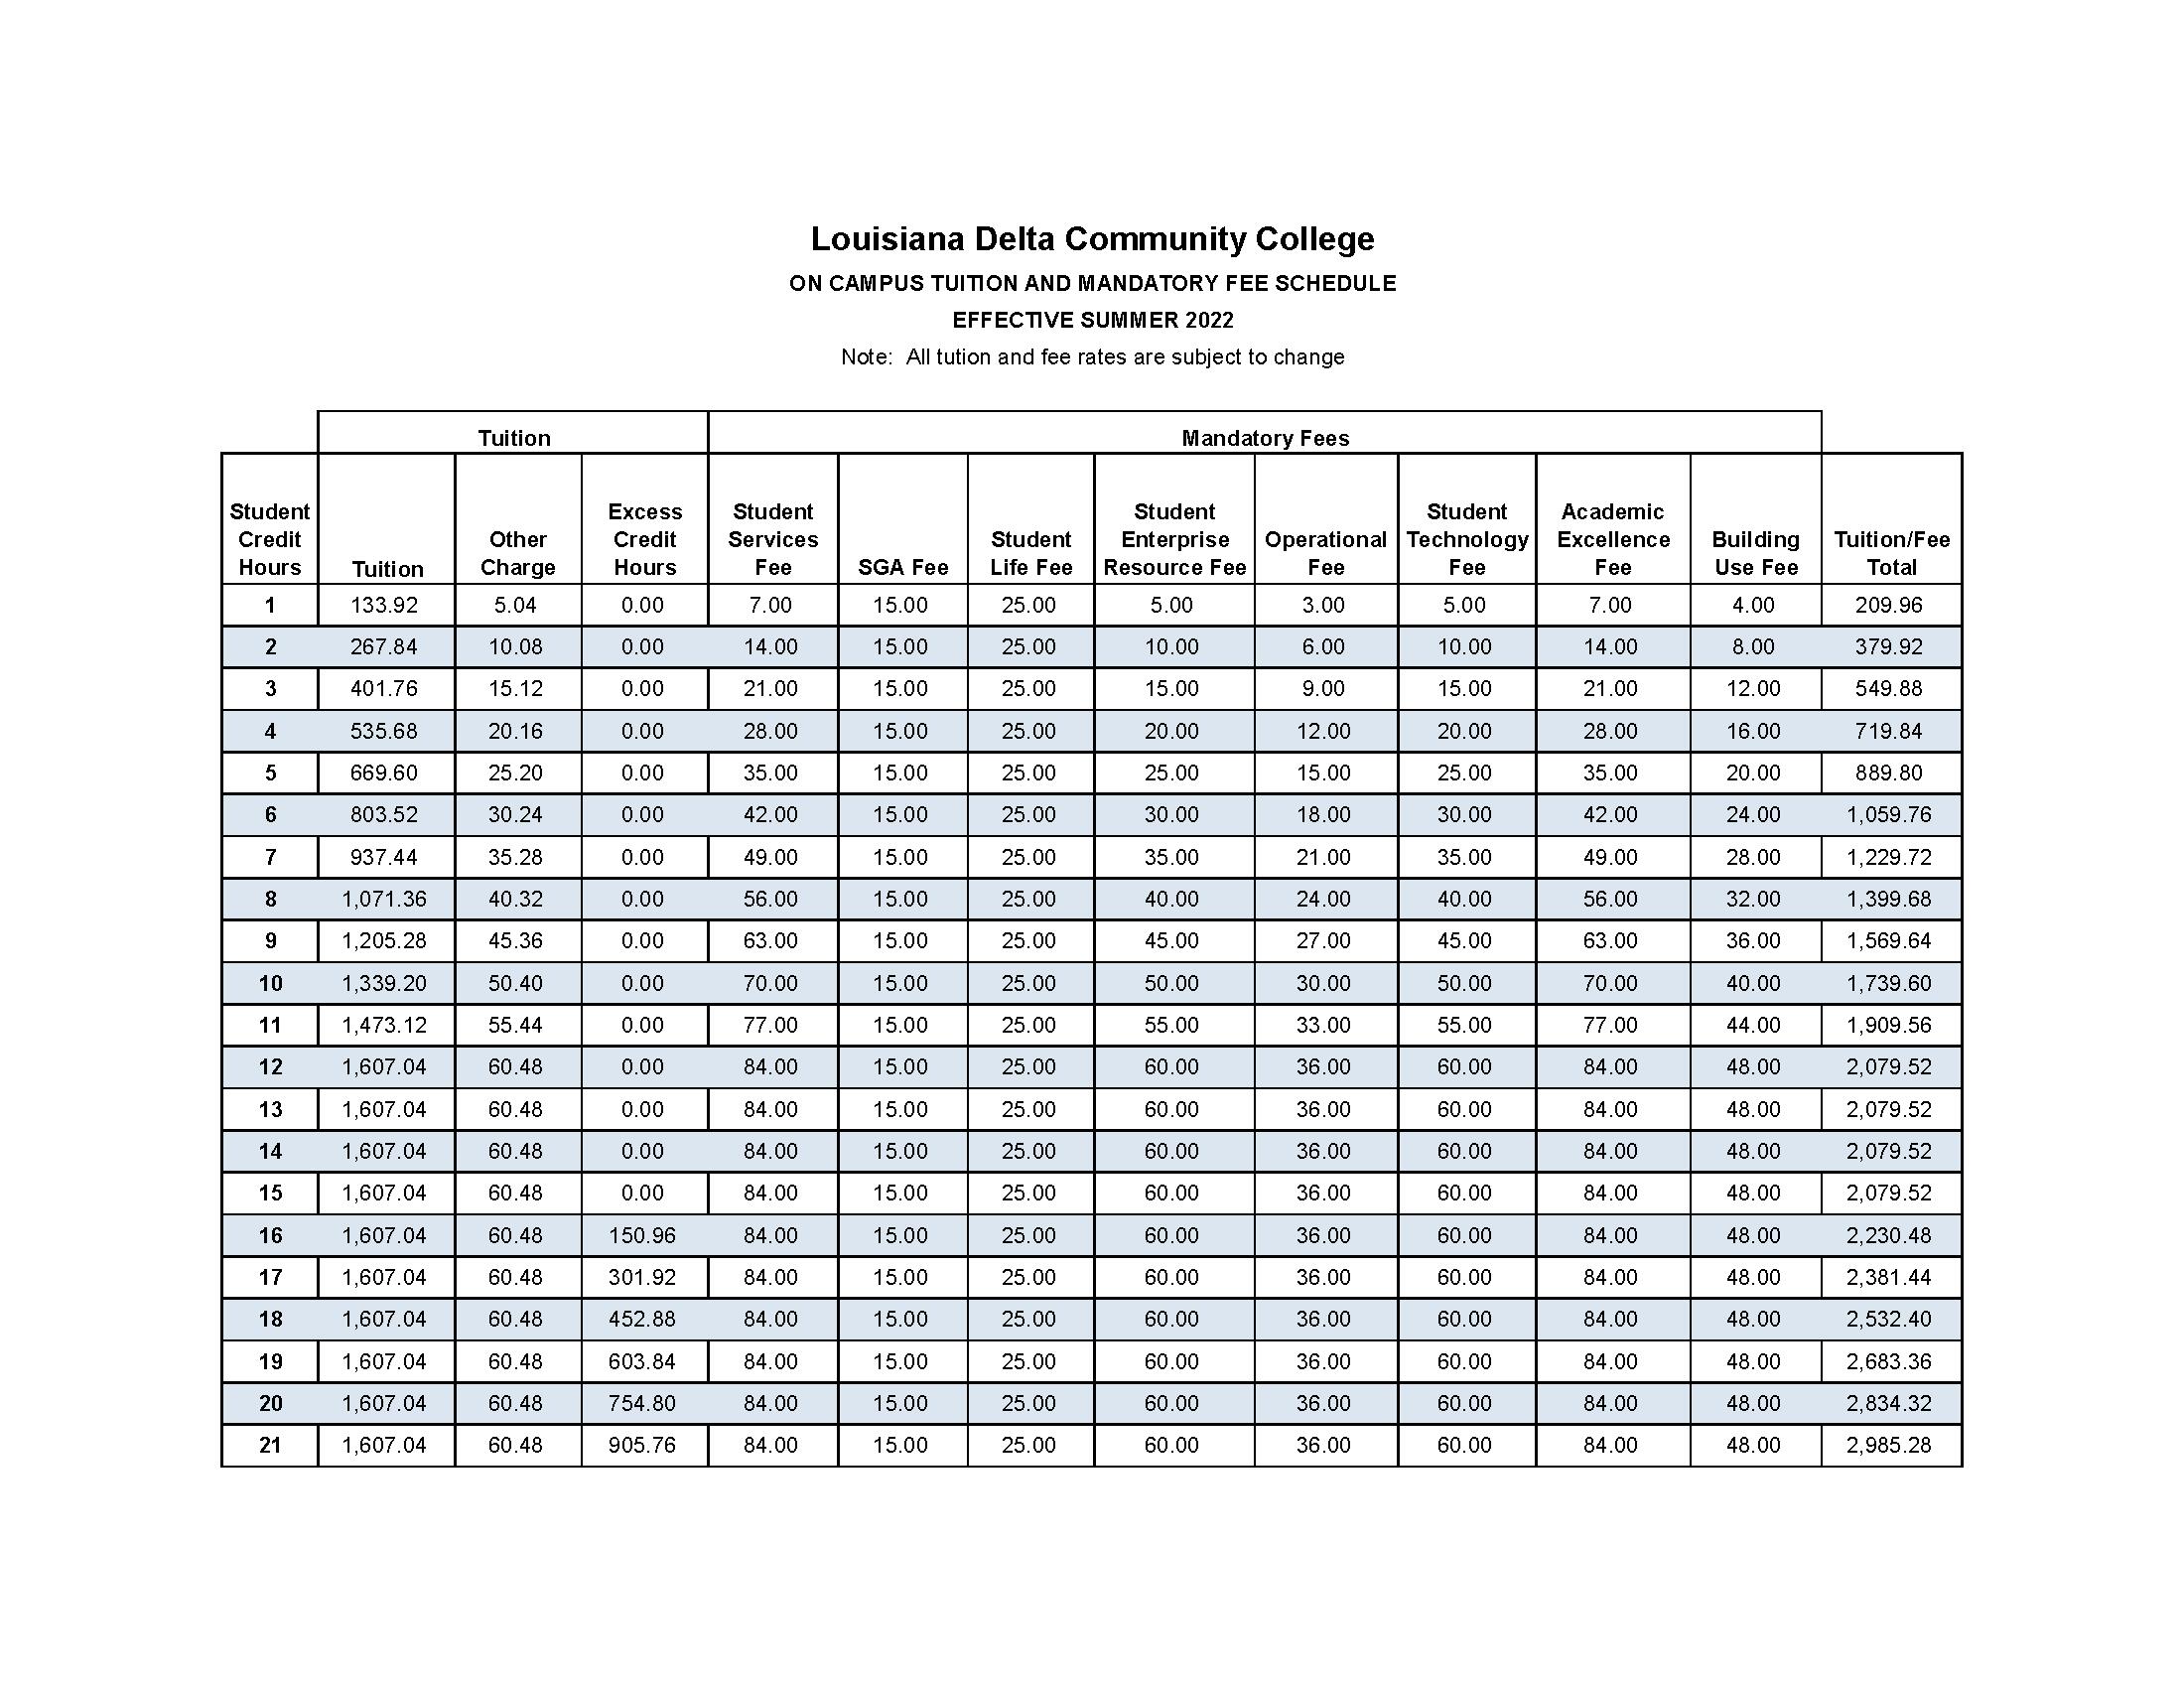 Image of a chart of the on-campus courses fee schedule effective as of Summer 2022